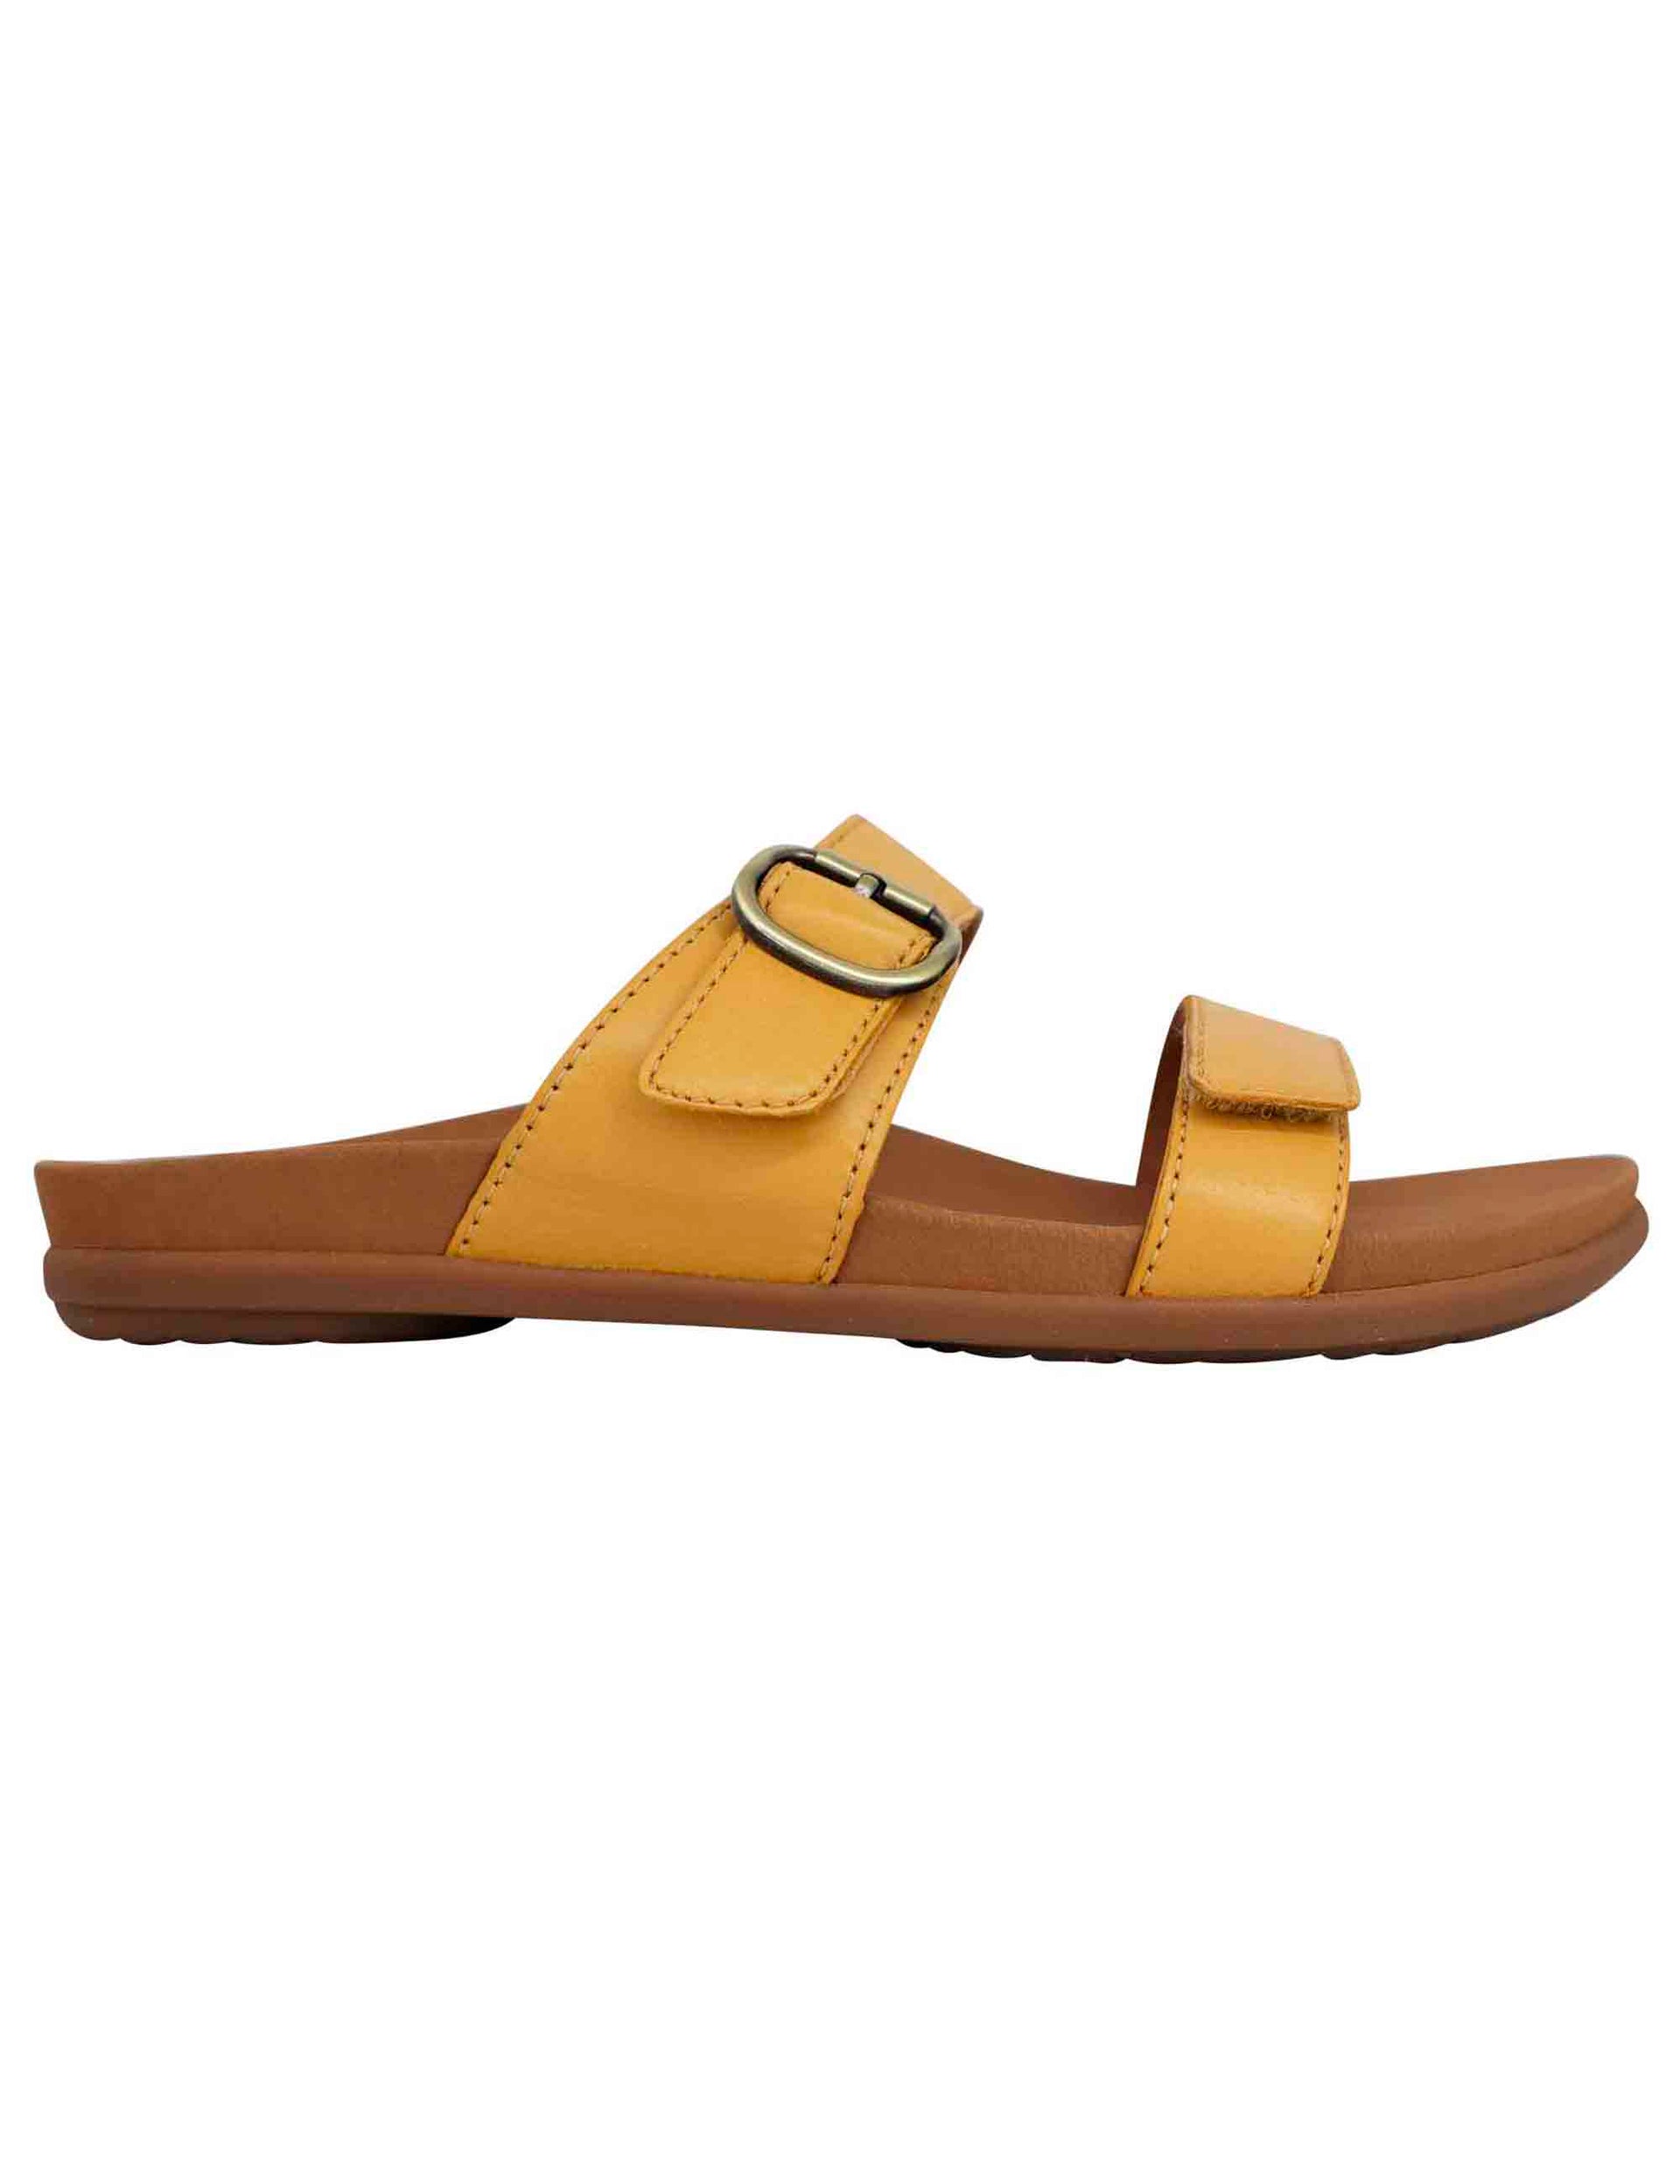 Women's flat sandals in yellow leather with side buckle